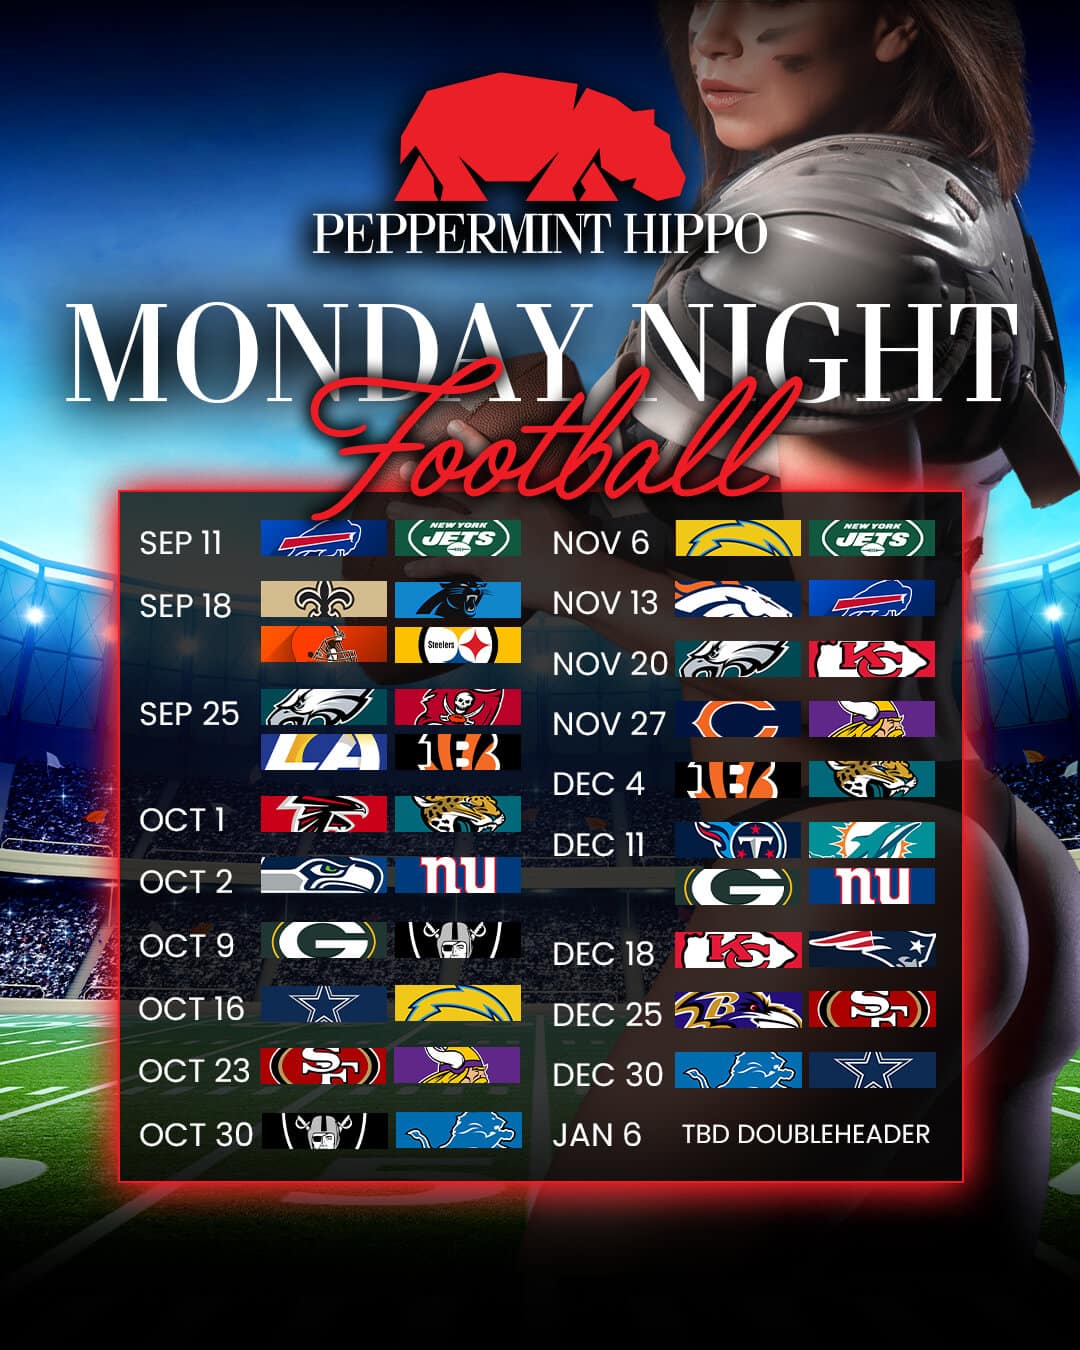 Monday Night Football at Peppermint Hippo